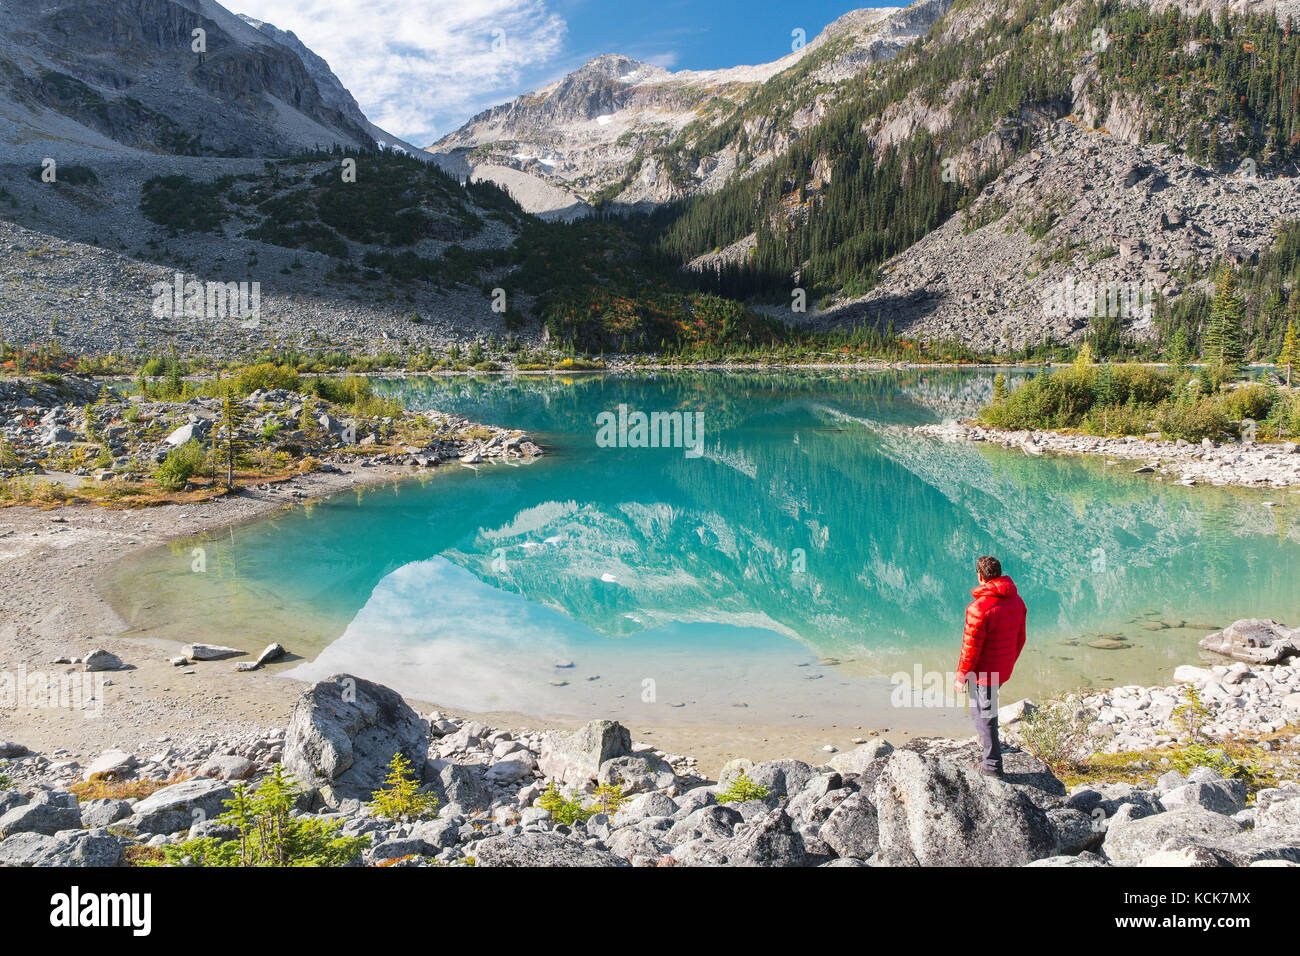 Hiker exploring the shore of upper Joffre Lake at Joffre Lakes provincial park in British Columbia, Canada. Stock Photo